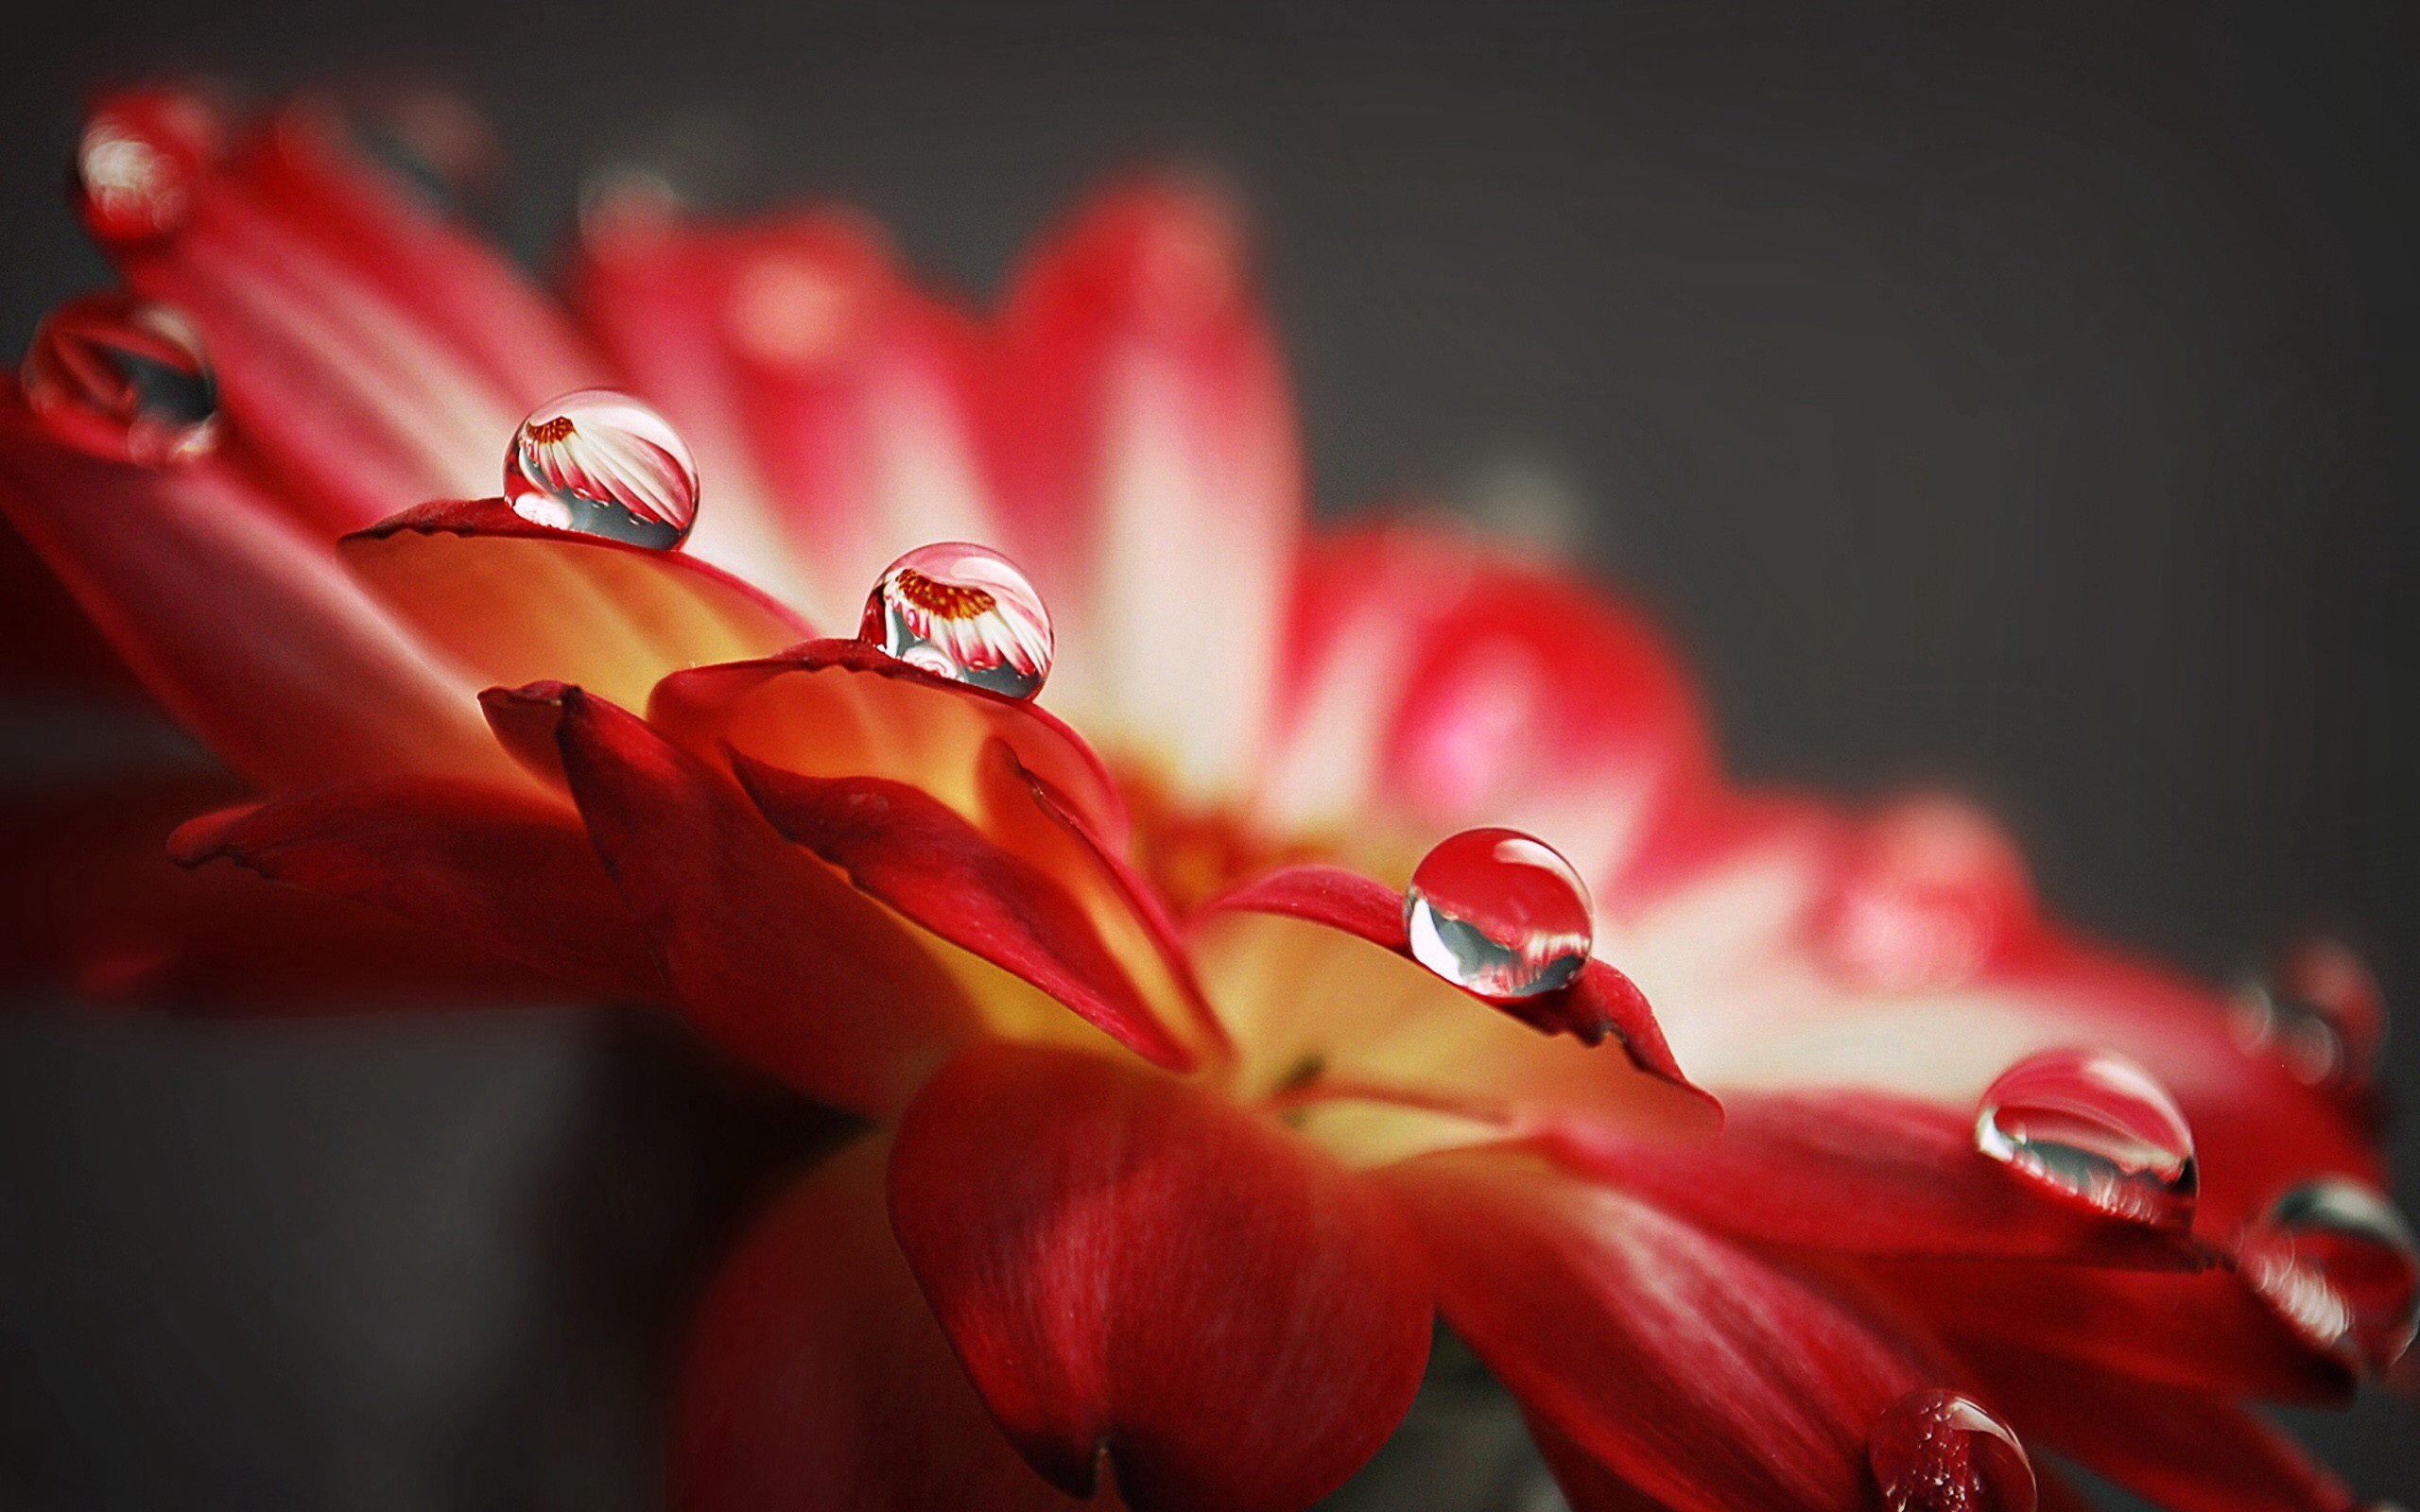 Flower Water Drops wallpapers Flower Water Drops stock photos 2560x1600